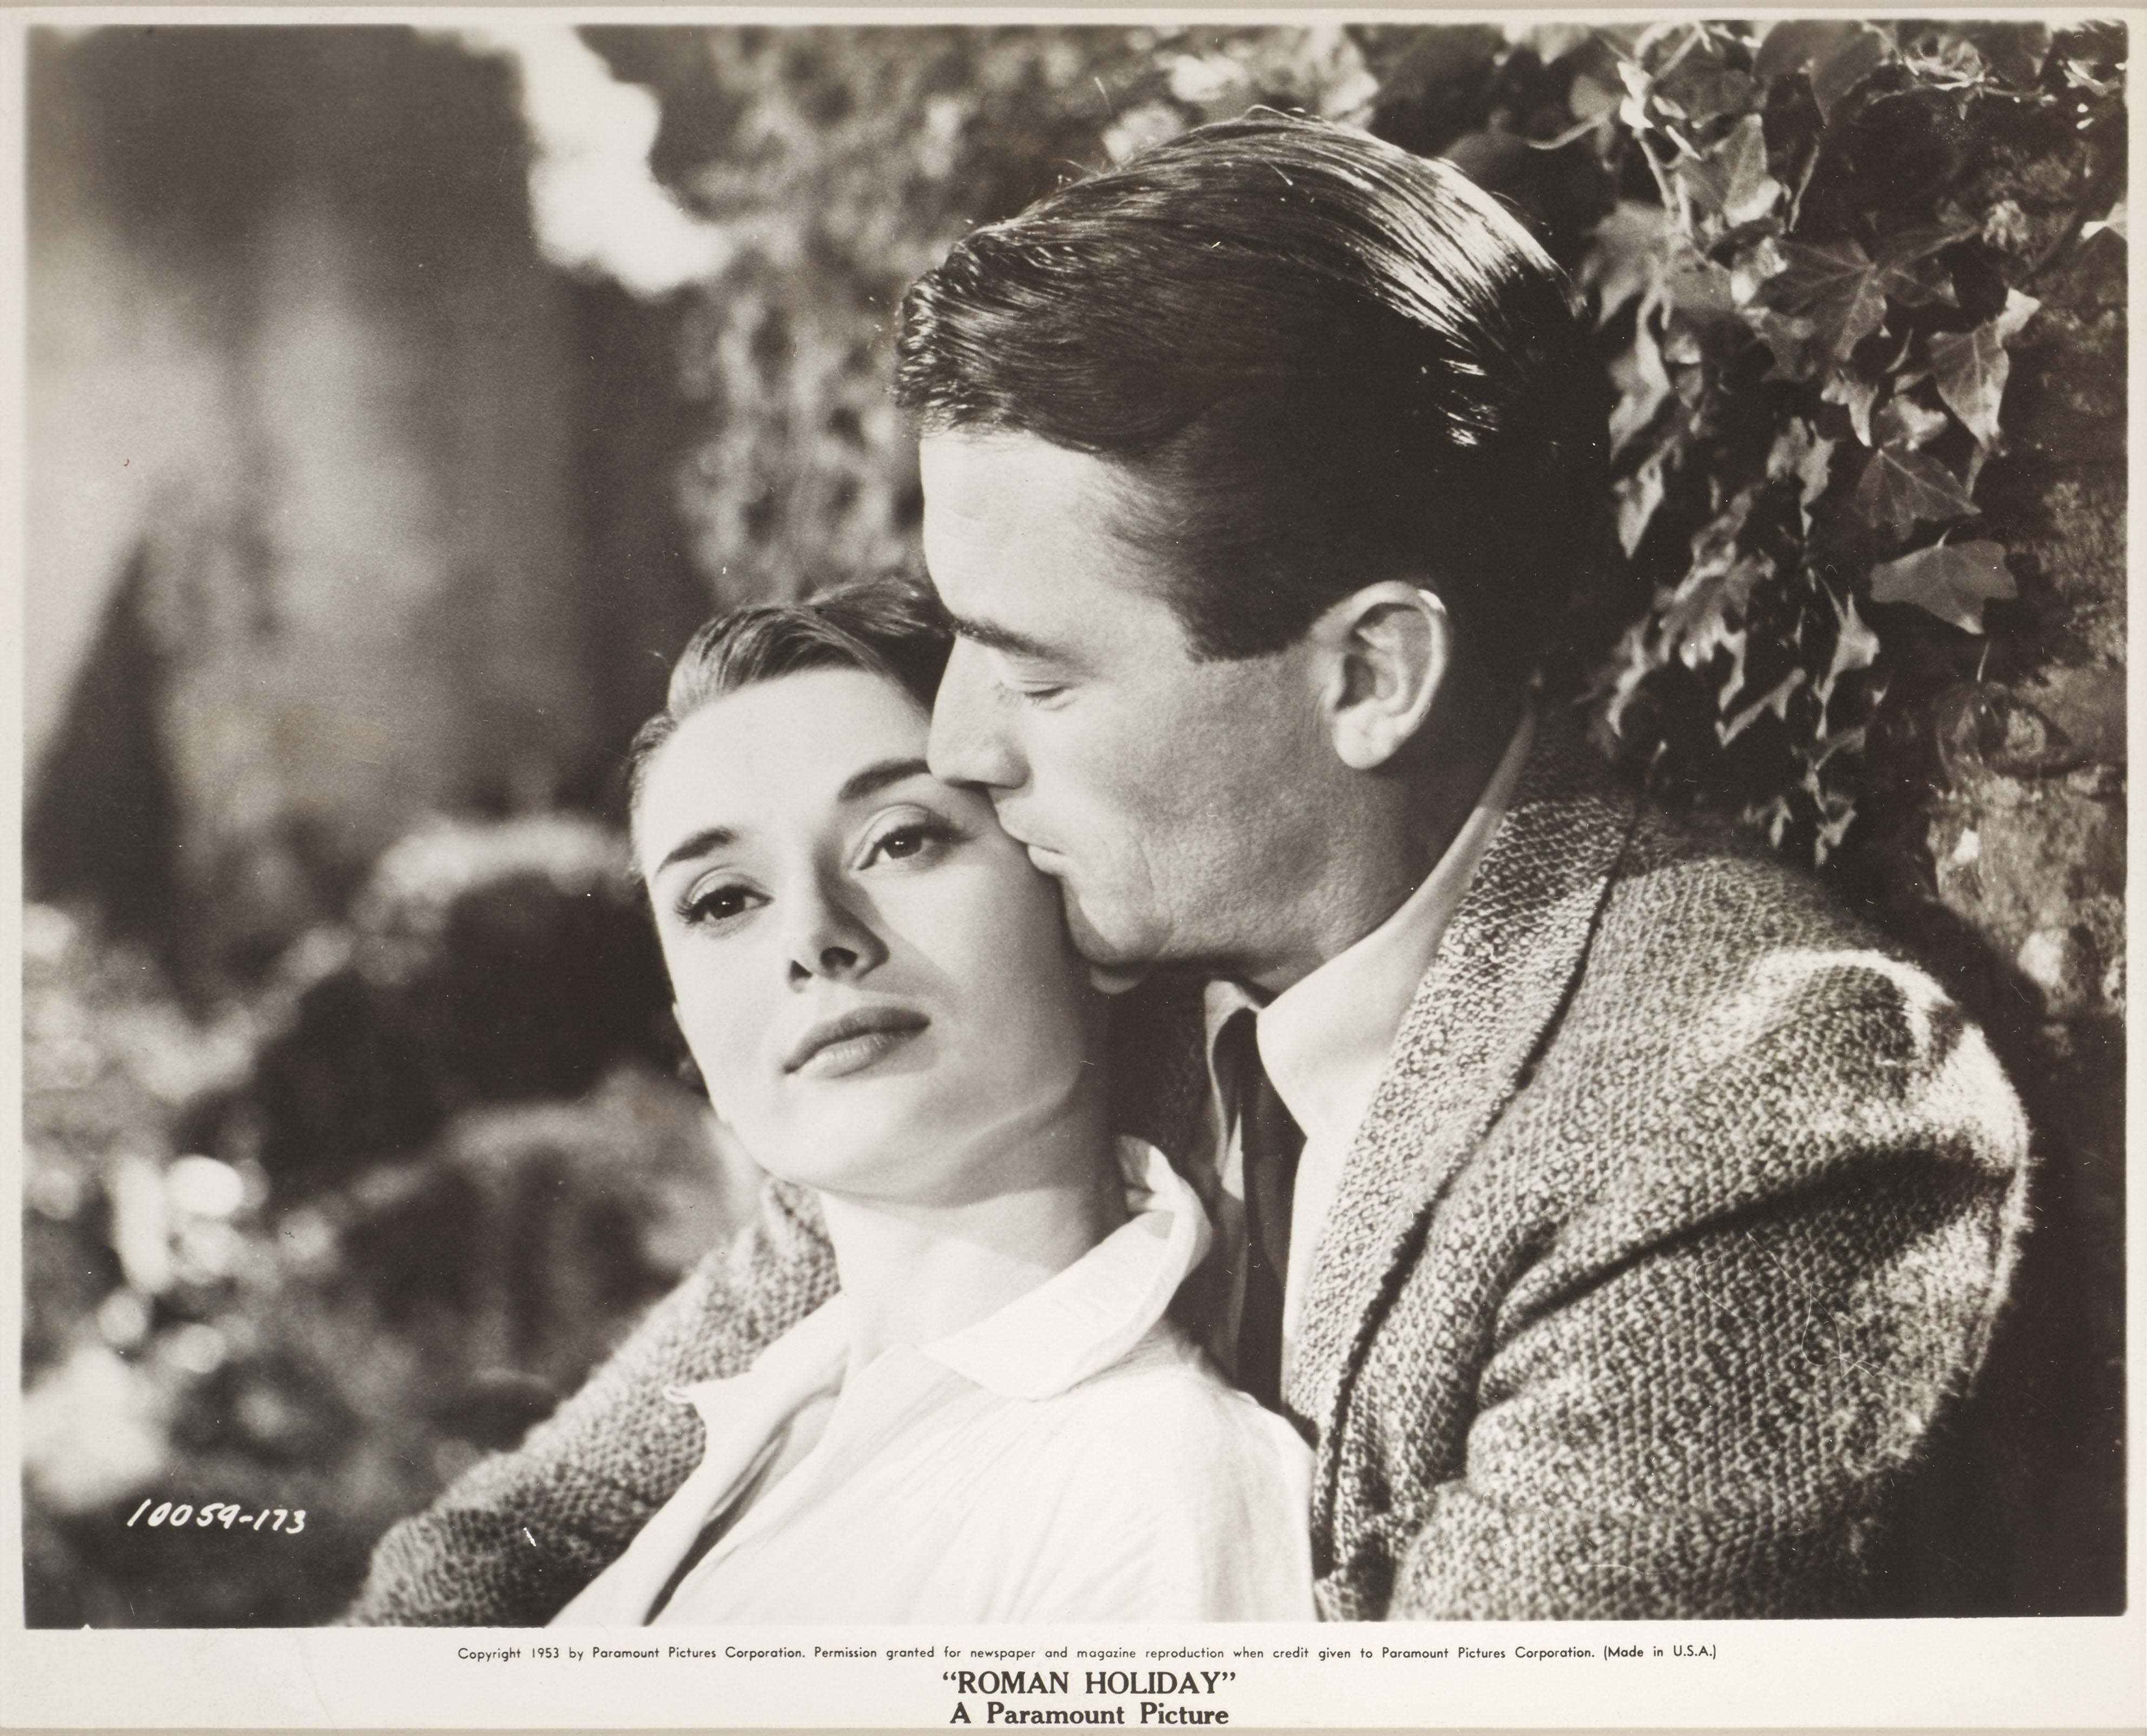 Original US production still for William Wyler's 1953 comedy romance starring Gregory Peck and Audrey Hepburn.
This still was created for 1962 re-release of the film.
The piece is conservation framed with UV plexiglass in a Tulip wood frame with